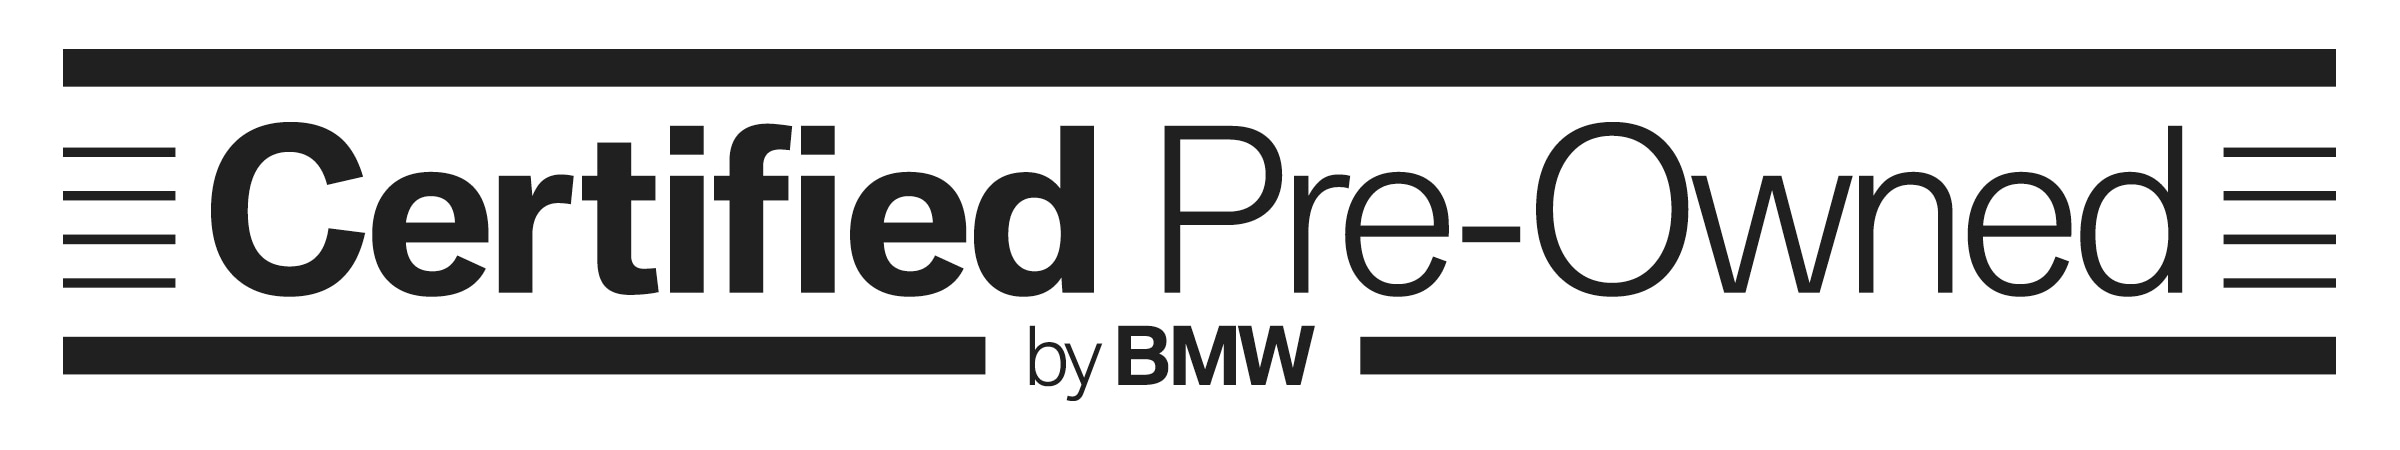 Bmw certified pre owned financing specials